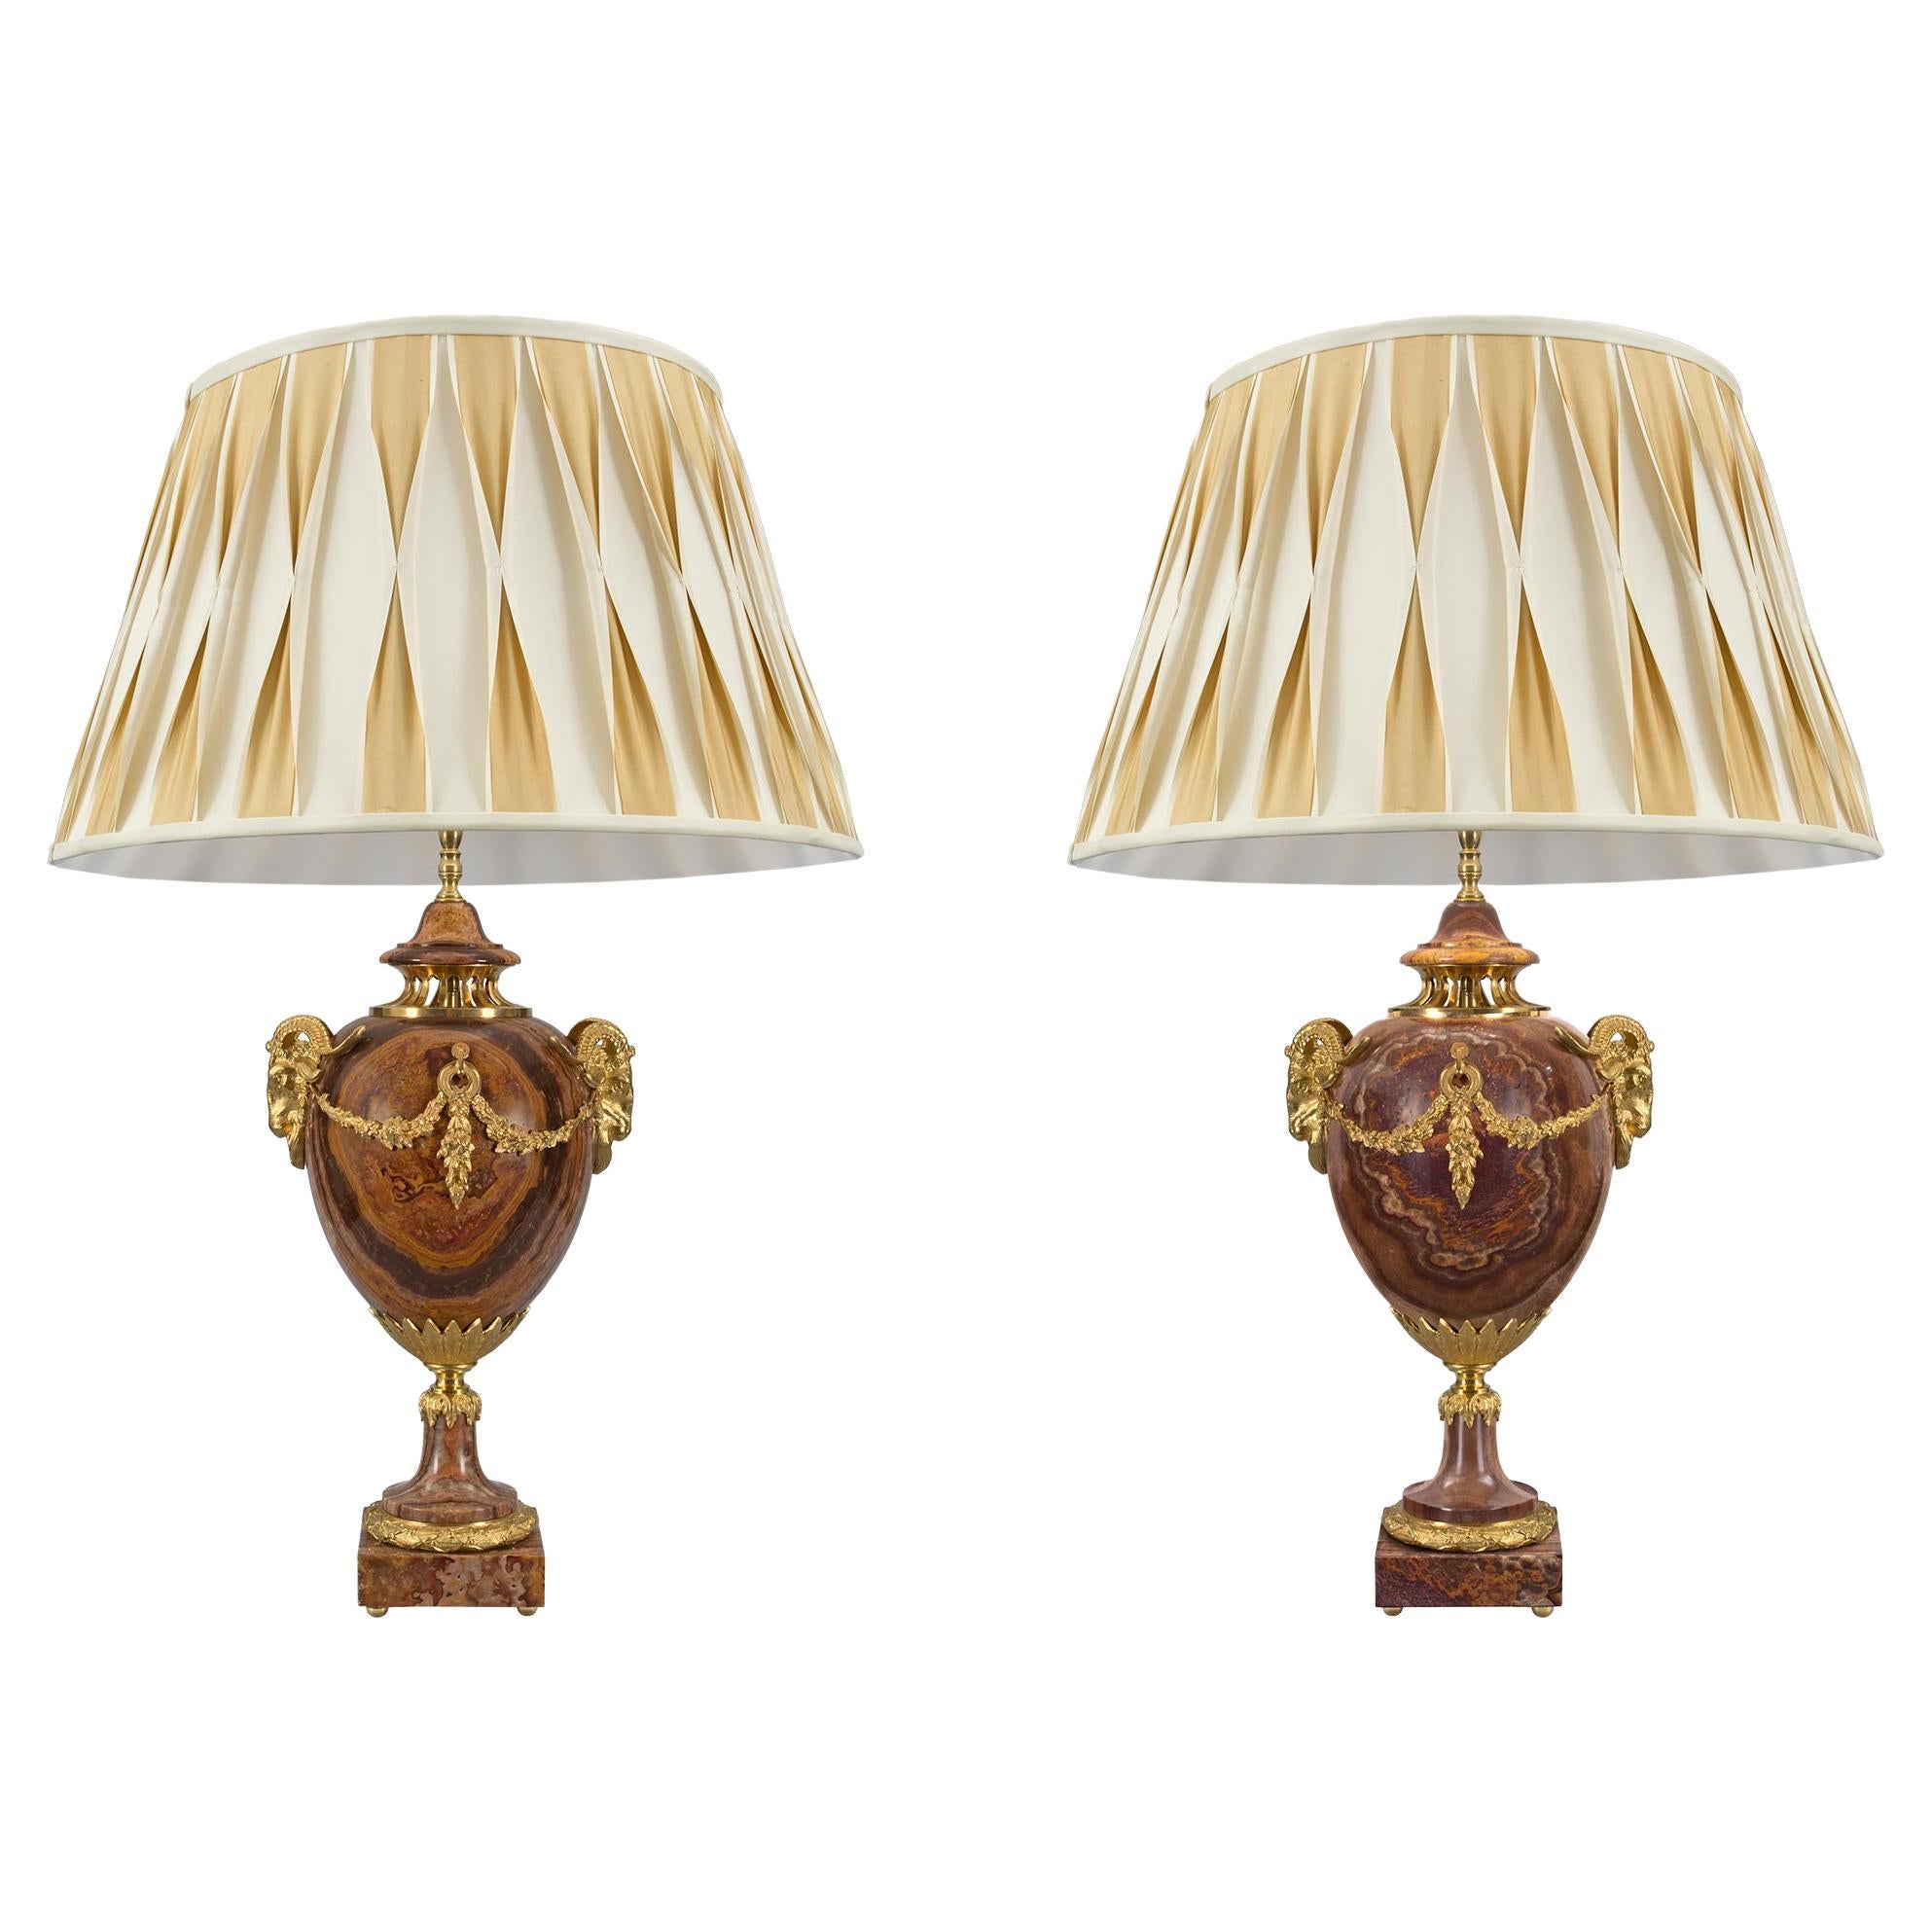 Pair of French Mid-19th Century Louis XVI Style Lamps